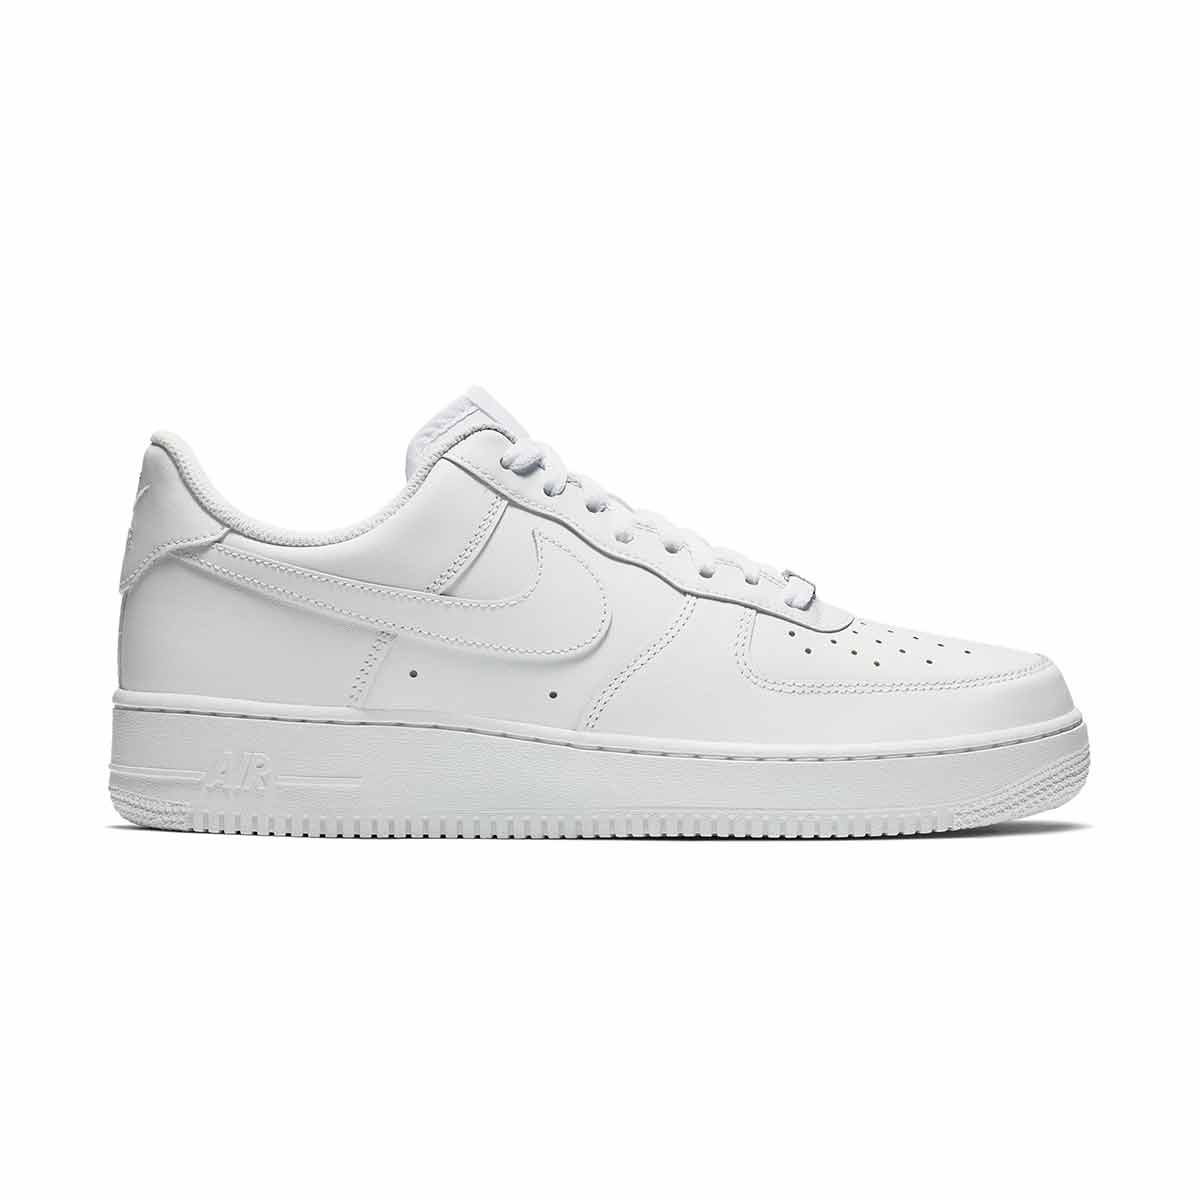 AIR FORCE 1 '07 NOS Available in store now! Monarch/Sail MEN SIZES 8-15  $130 DM FOR MORE INFORMATION #SuccezZ #zZ #2214 #chicago #af1…